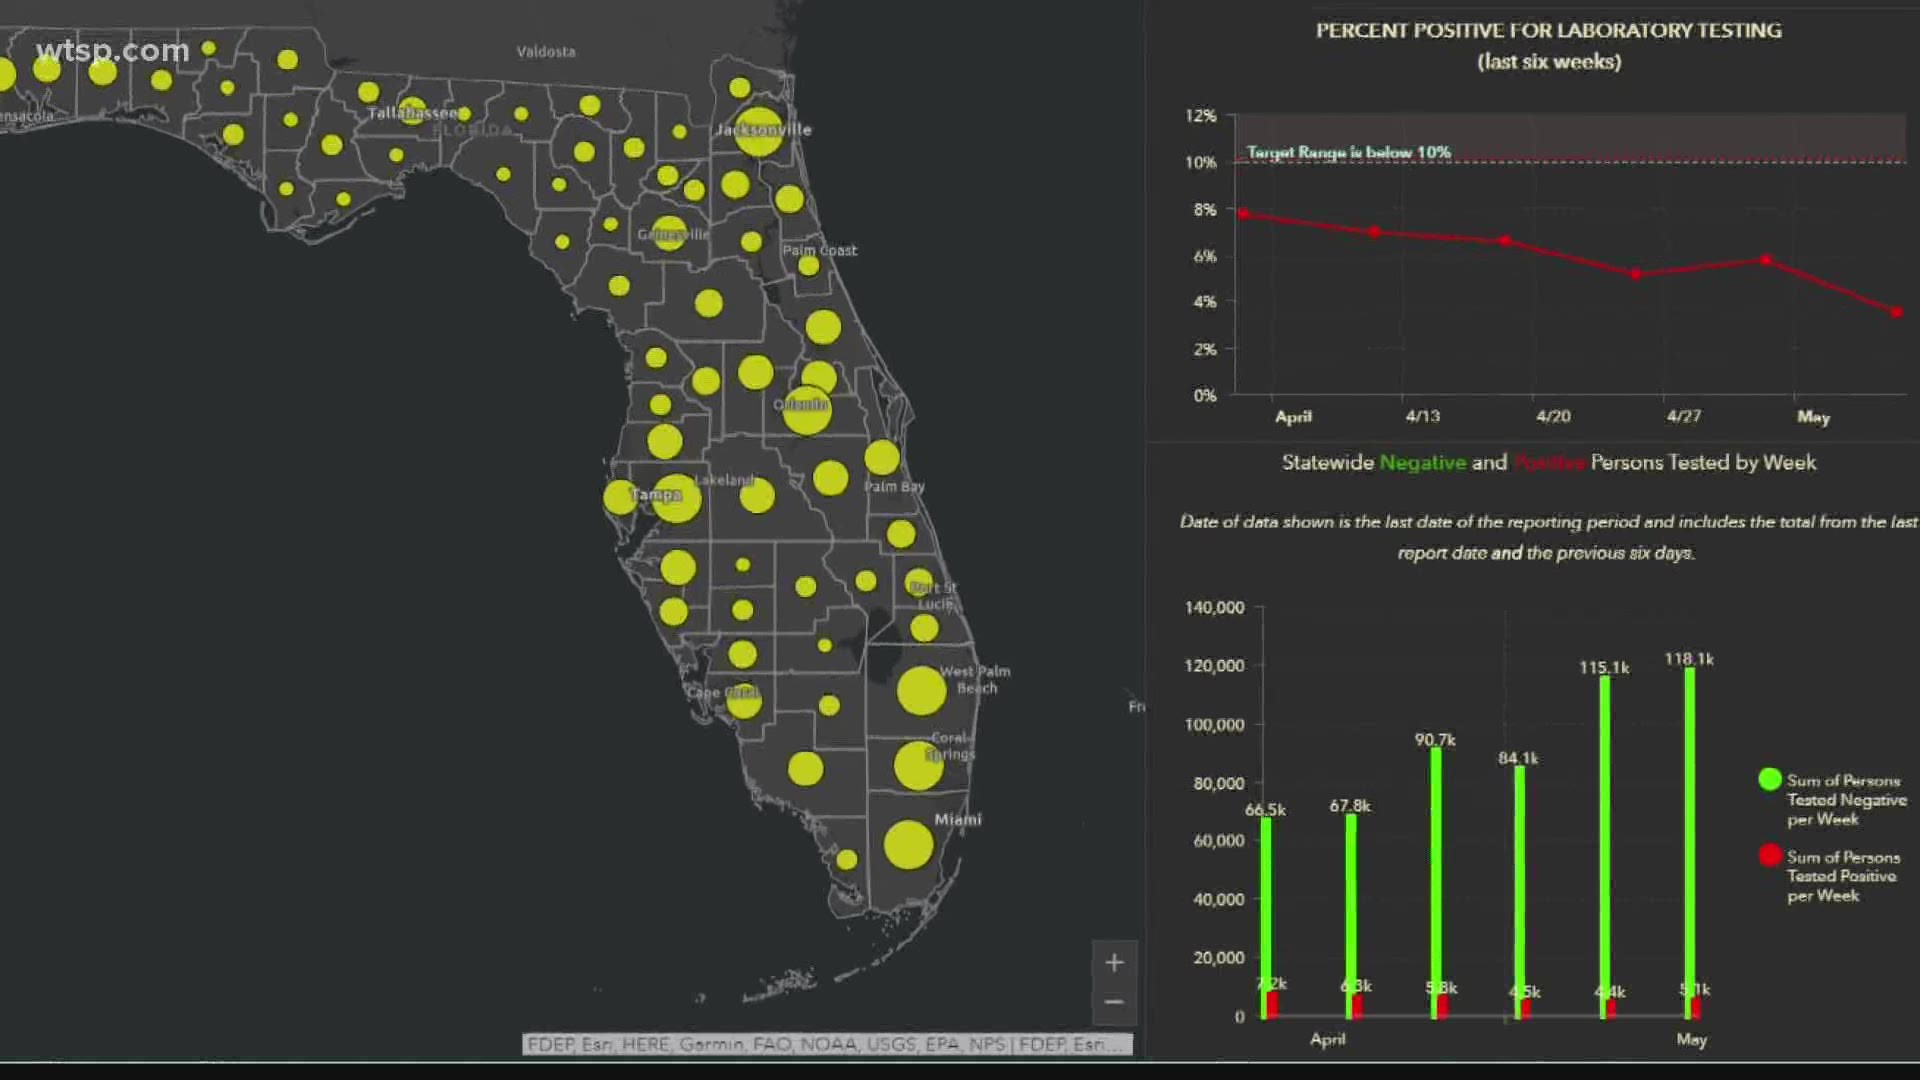 Woman who built Florida's COVID-19 dashboard removed from project | wtsp.com